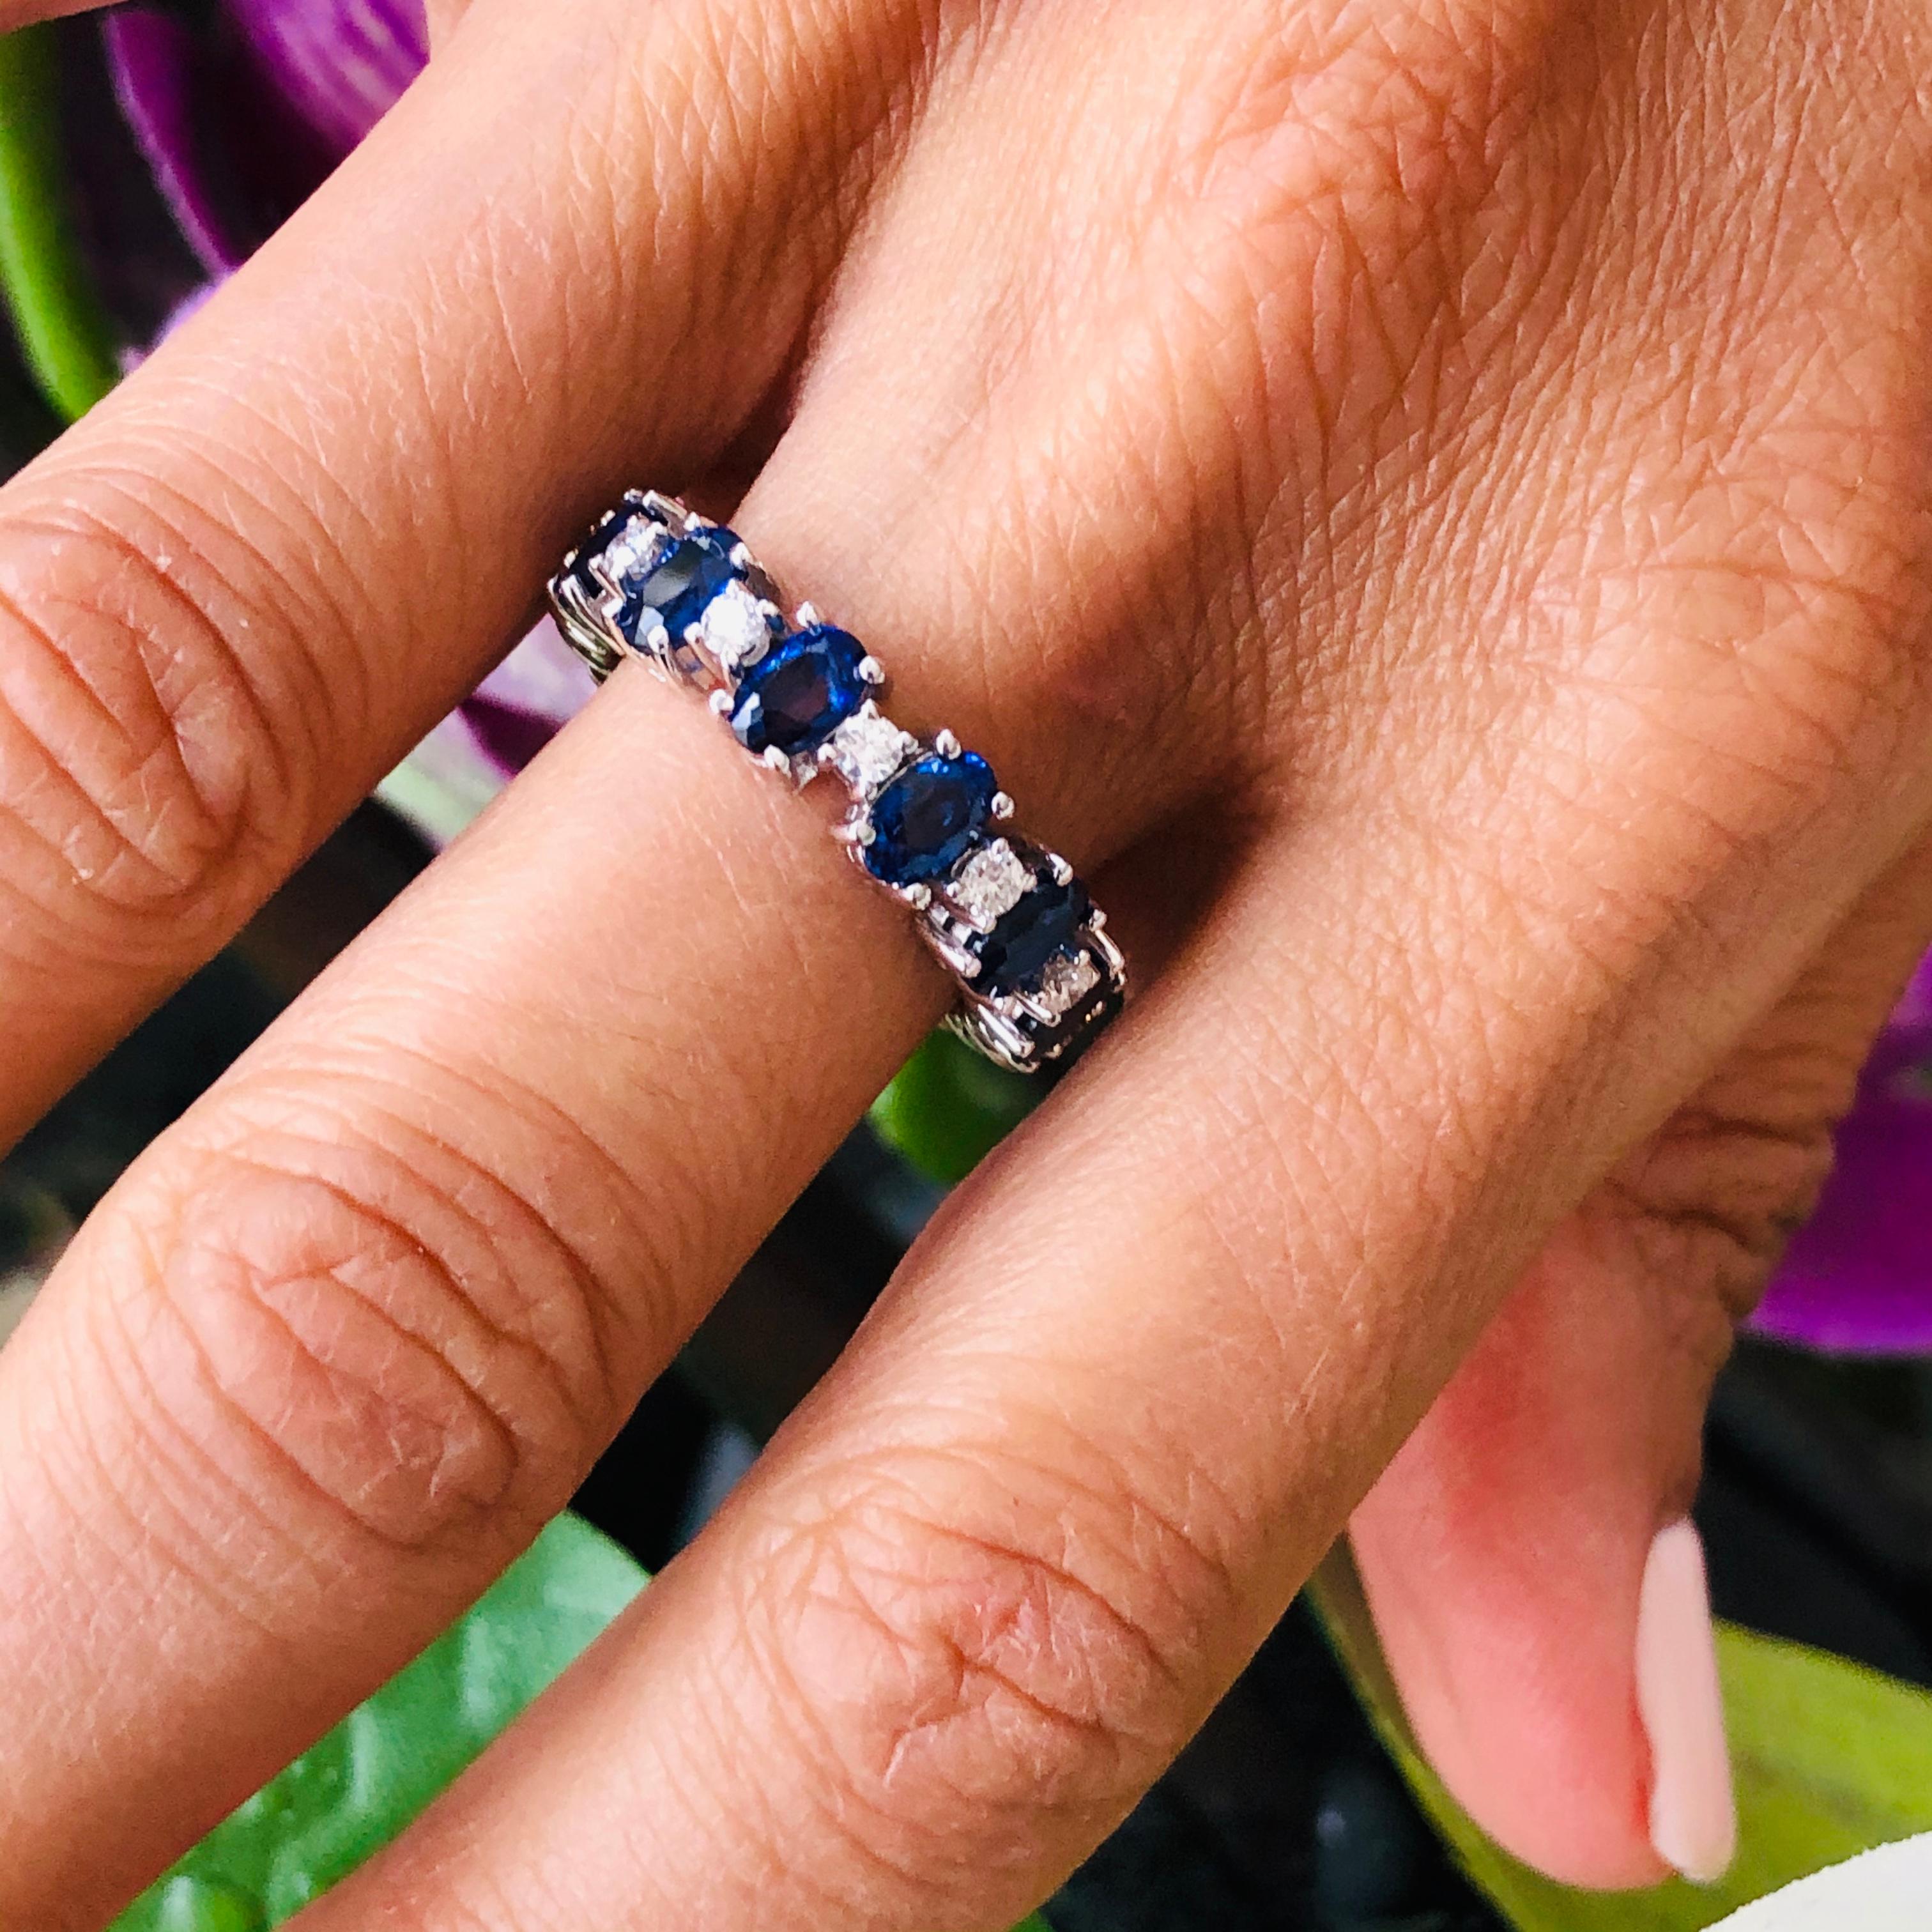 Offered here is a beautiful sapphire and diamonds eternity ring set in 18kt white gold. The ring has twelve ( 12 ) oval shape sapphires with an estimated total weight of 4.30 carats. The sapphire have a gorgeous deep blue color. In between each